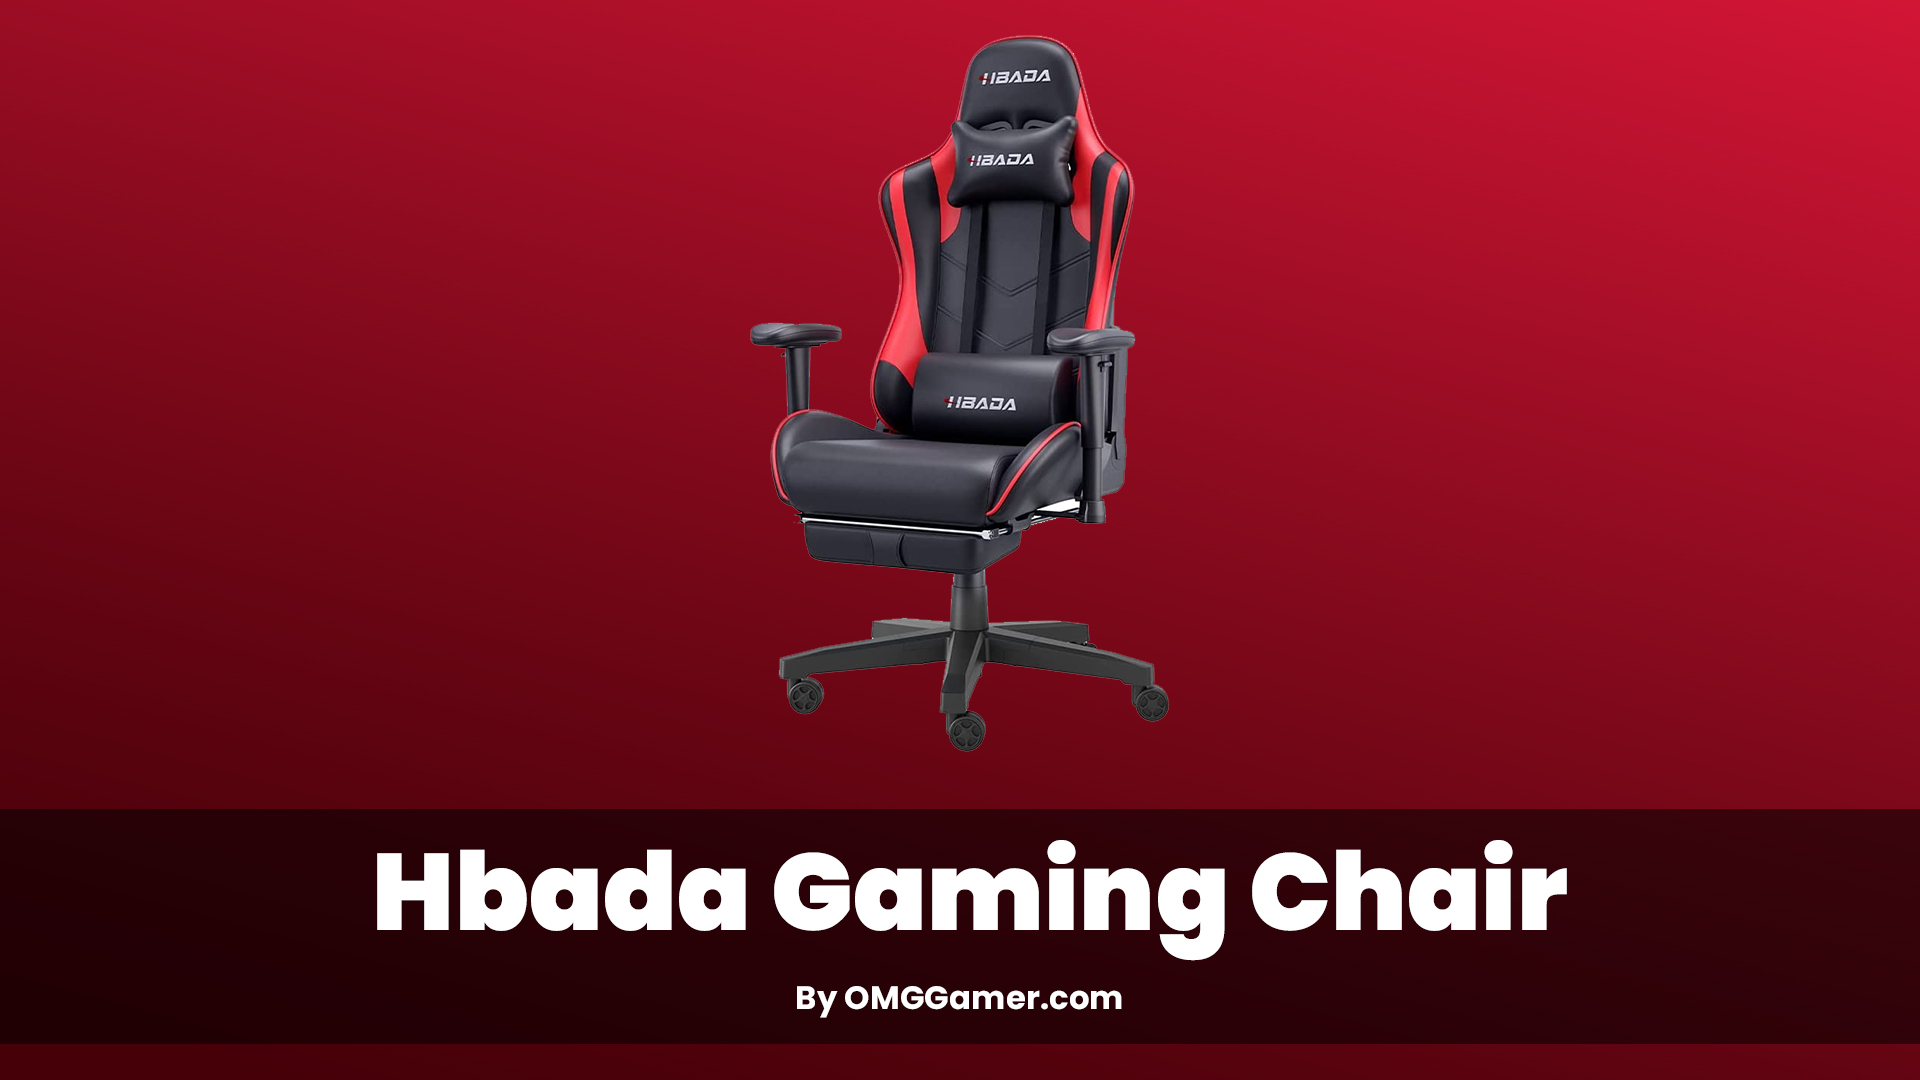 Hbada: Red and Black Gaming Chair